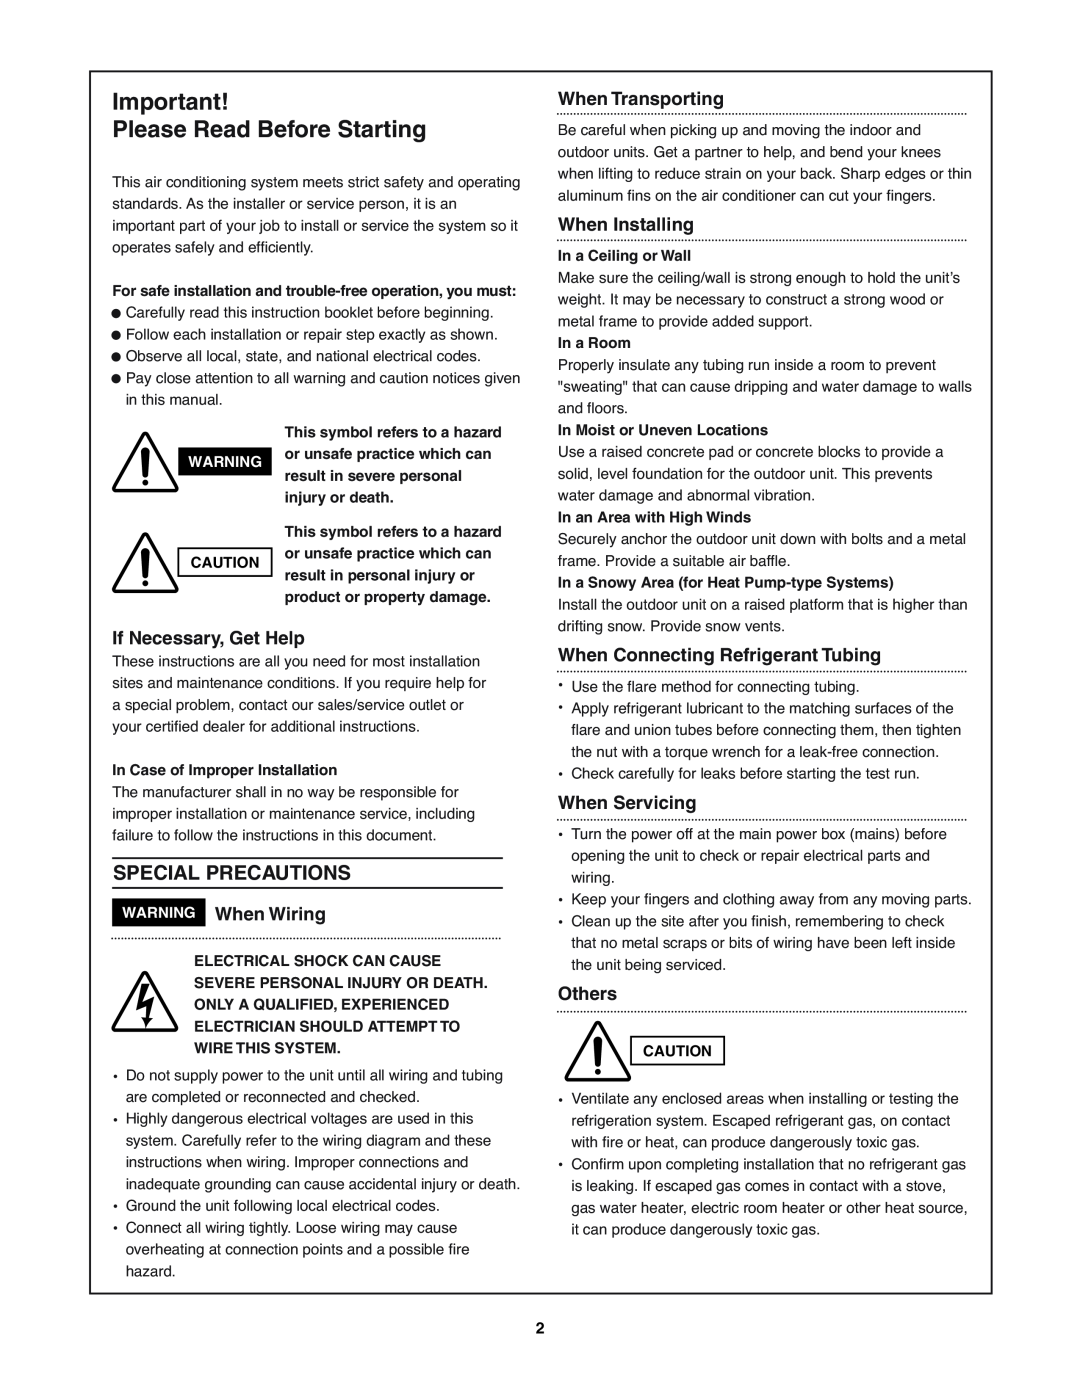 Sanyo KMS2472 Special Precautions, Please Read Before Starting, When Transporting, When Installing, If Necessary, Get Help 